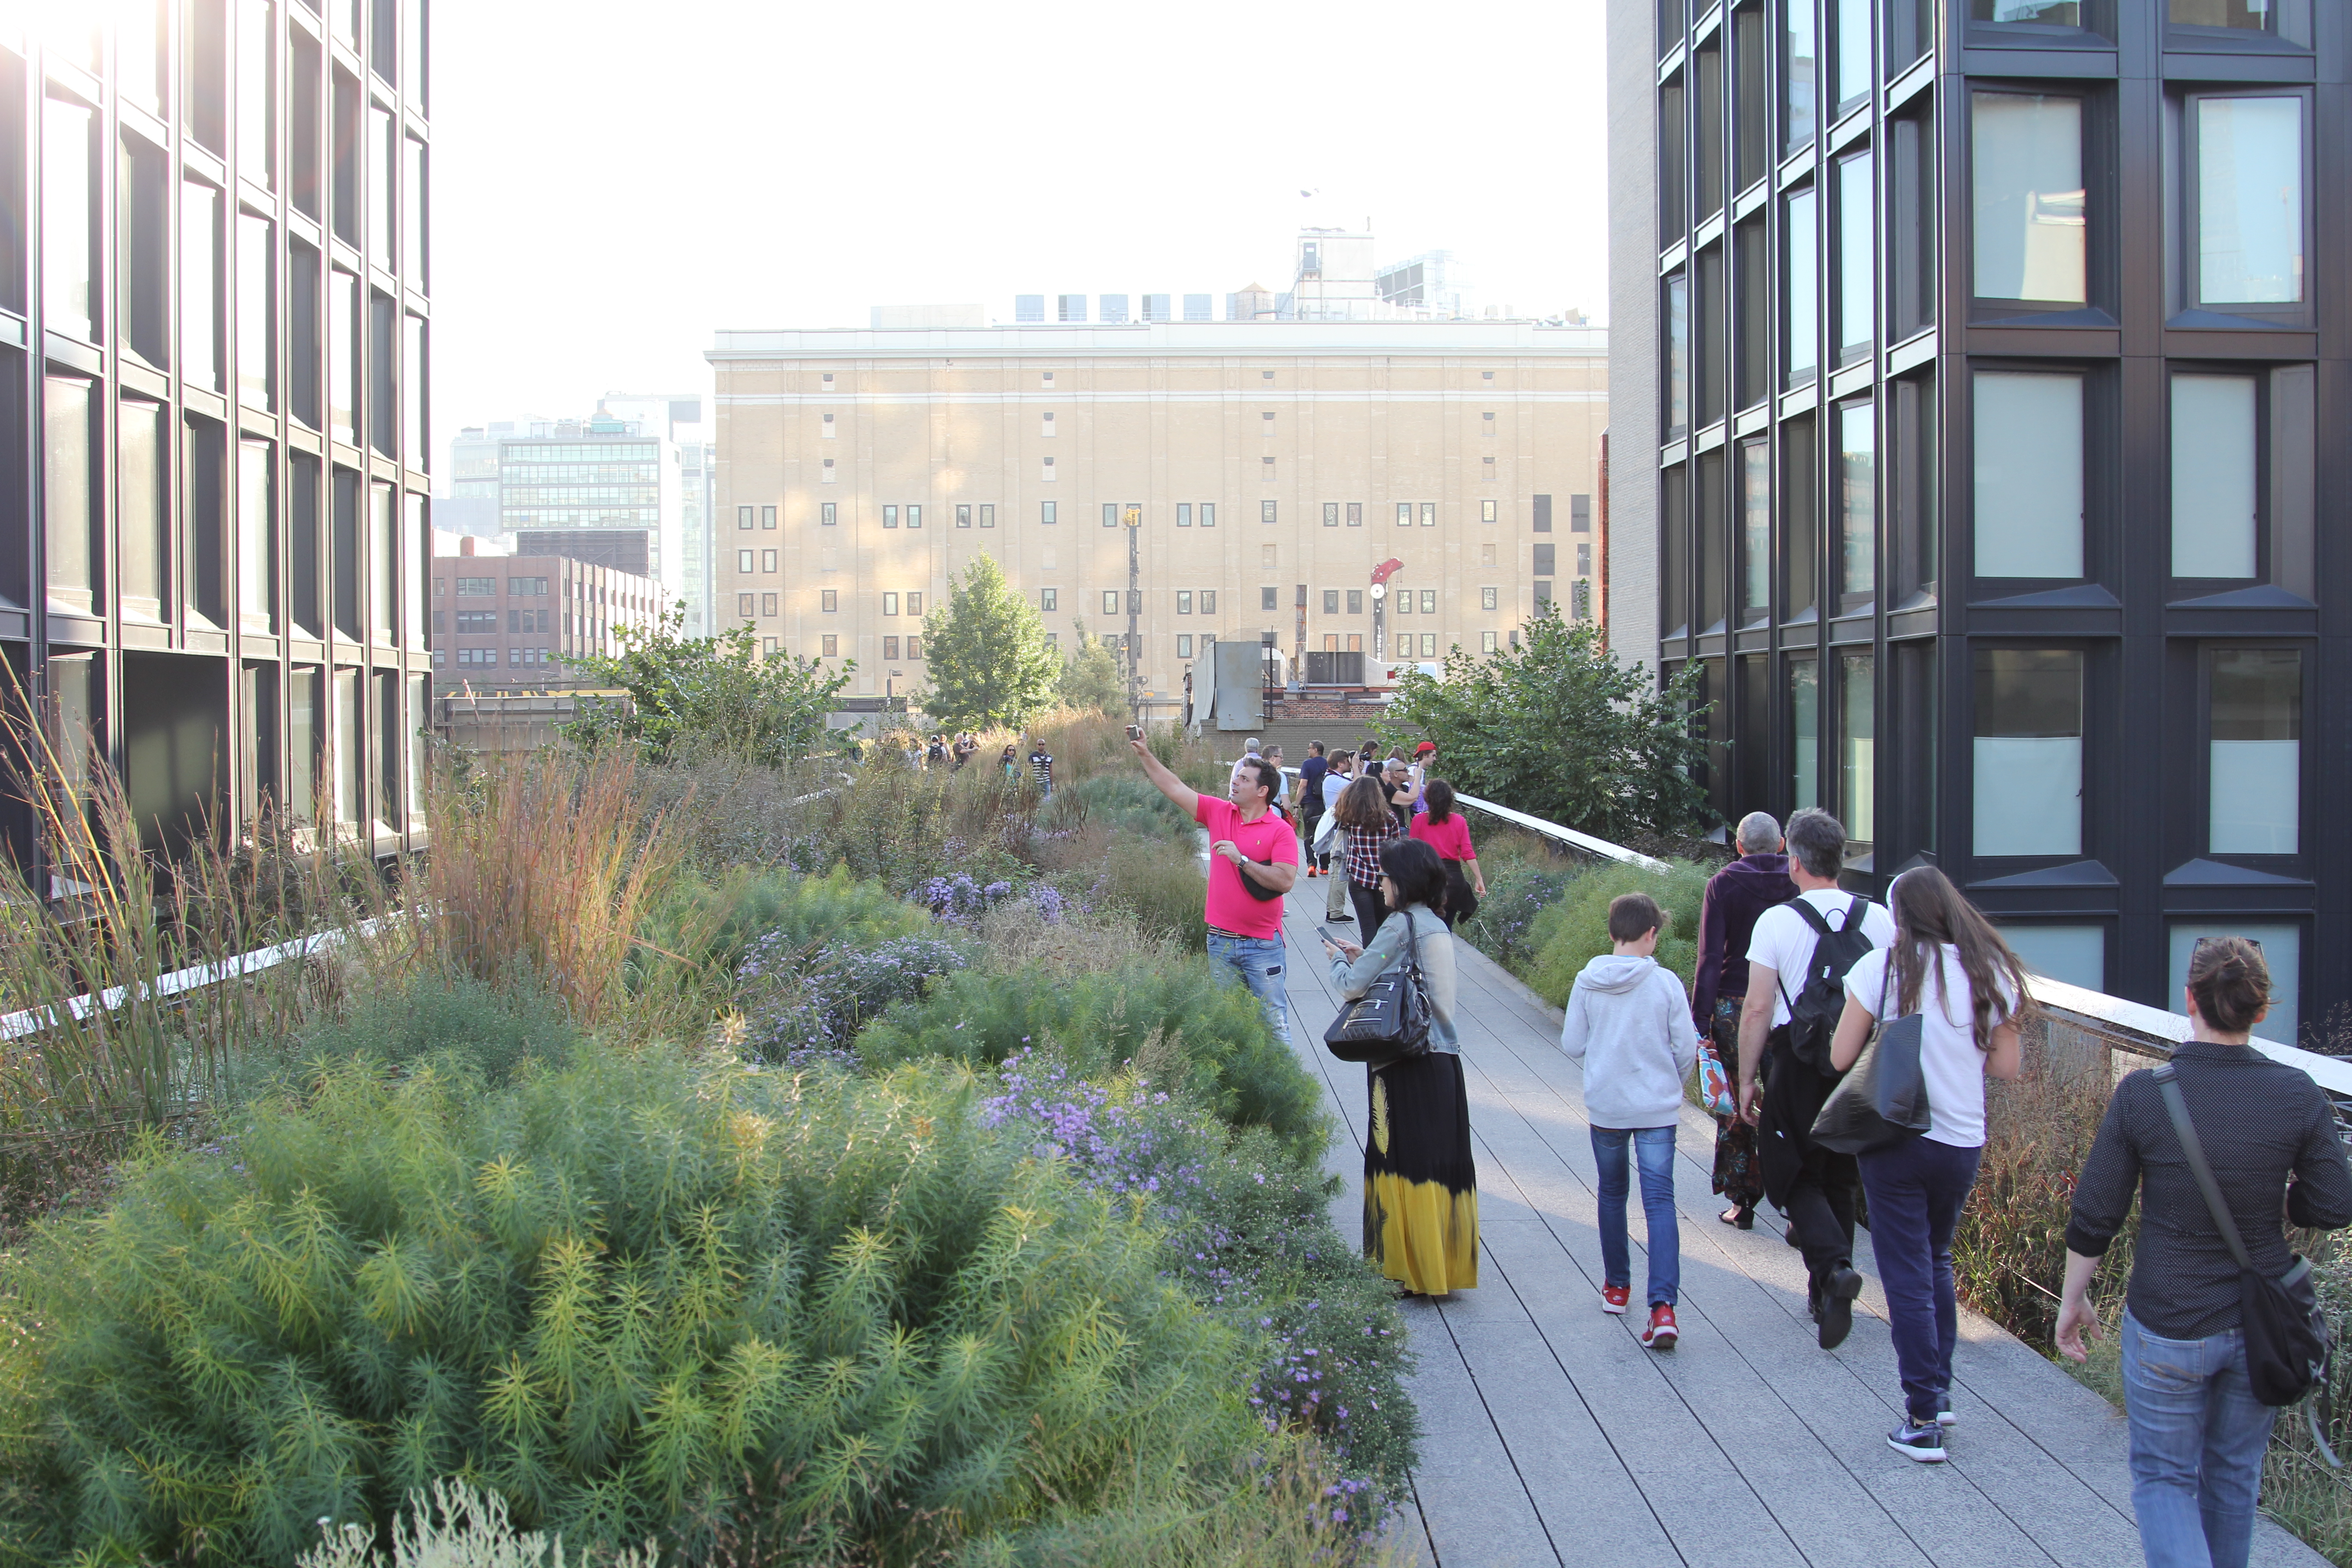 Response to “Cut, Folded, Pressed, and Other Actions” / High Line Visit